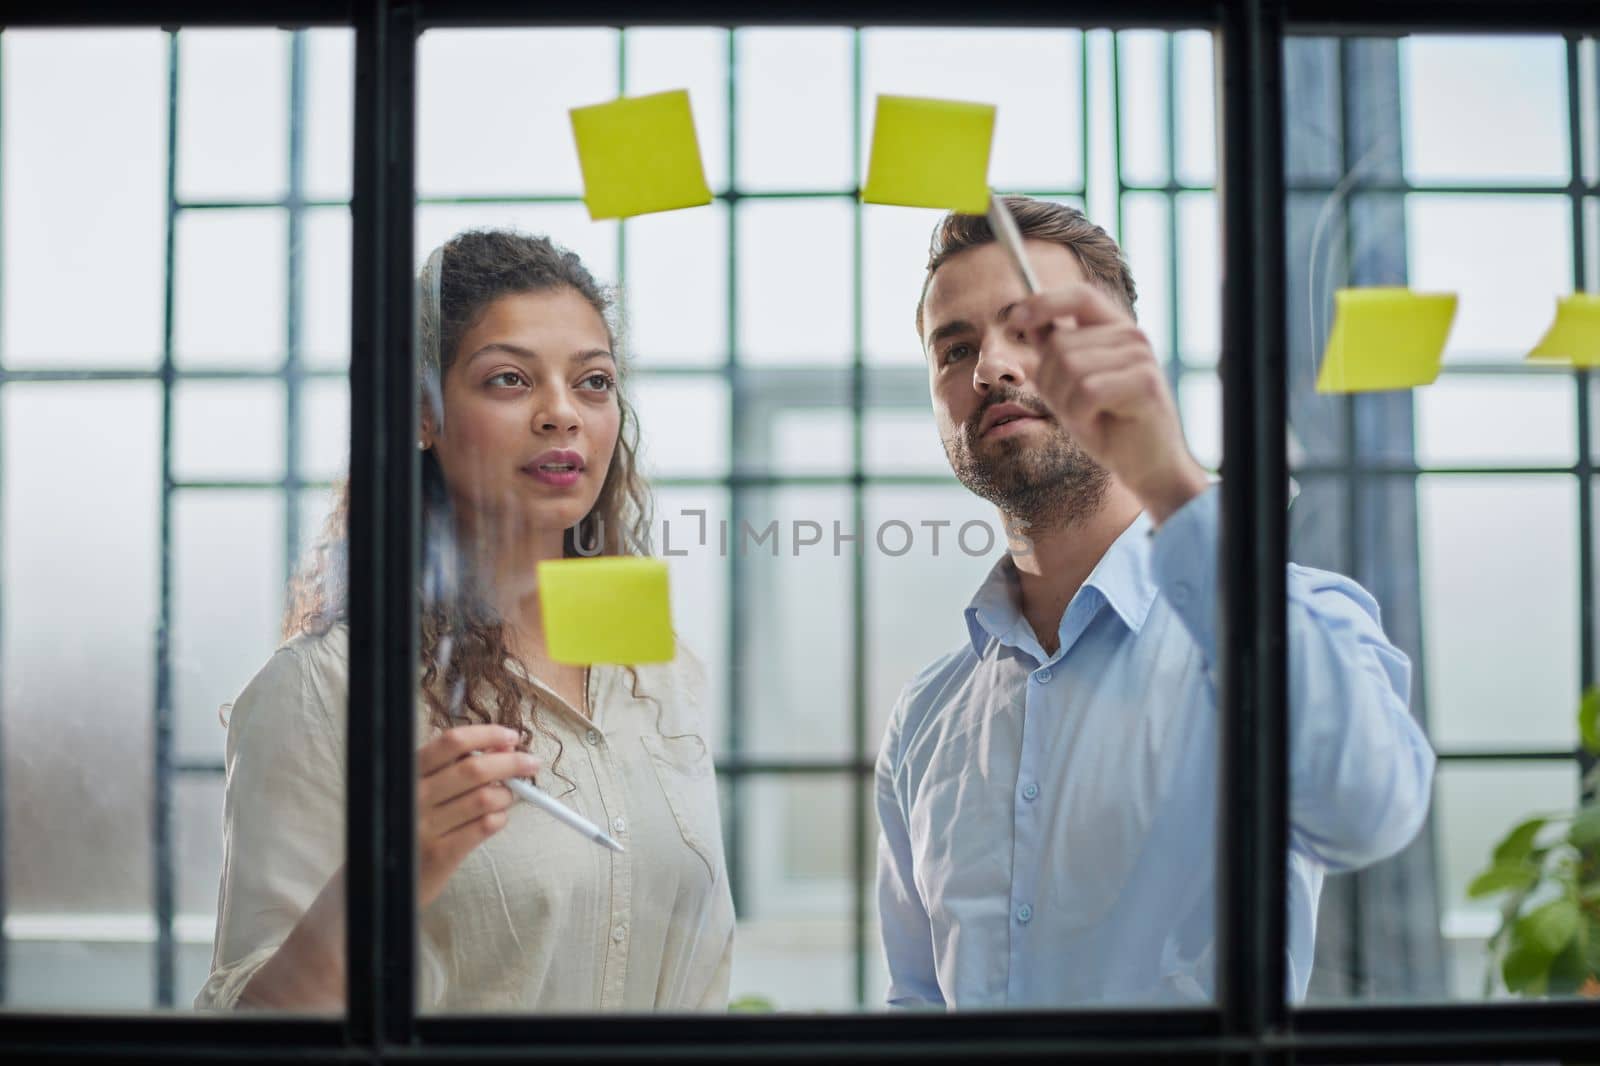 Creative professionals standing and discussing in office behind glass wall with sticky notes